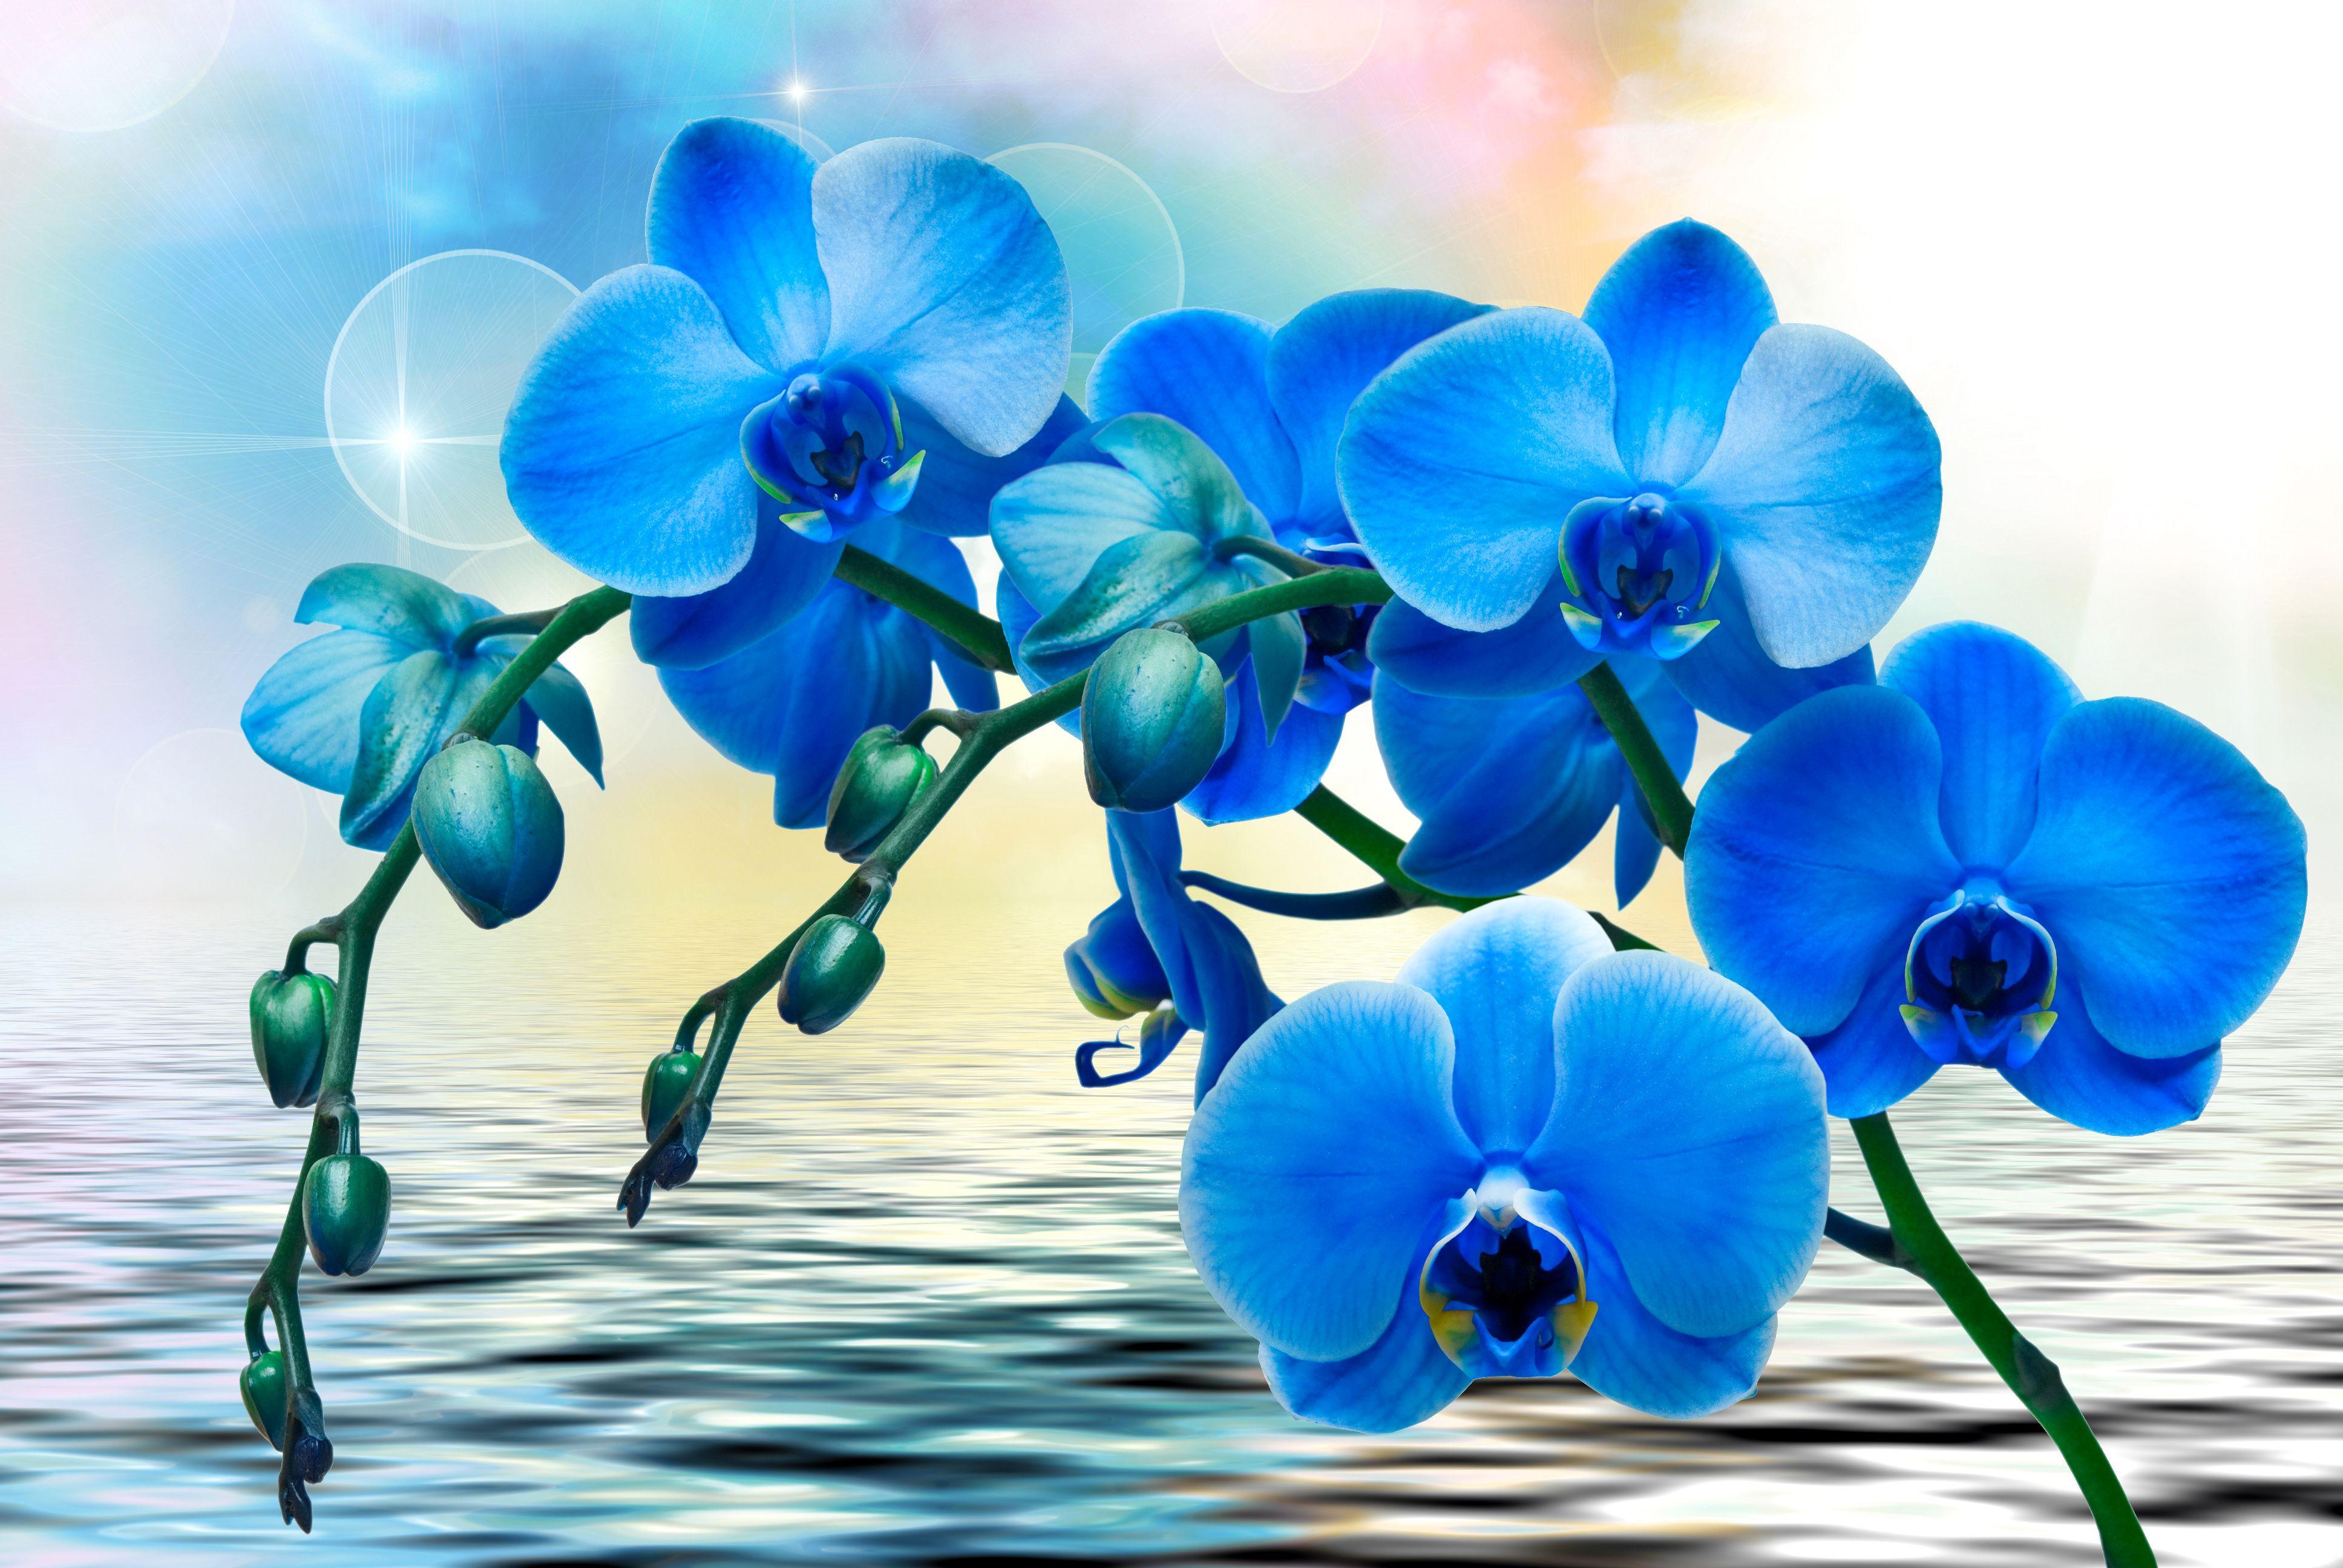 Blue Orchids 4k Ultra HD Wallpaper. Background Imagex2592